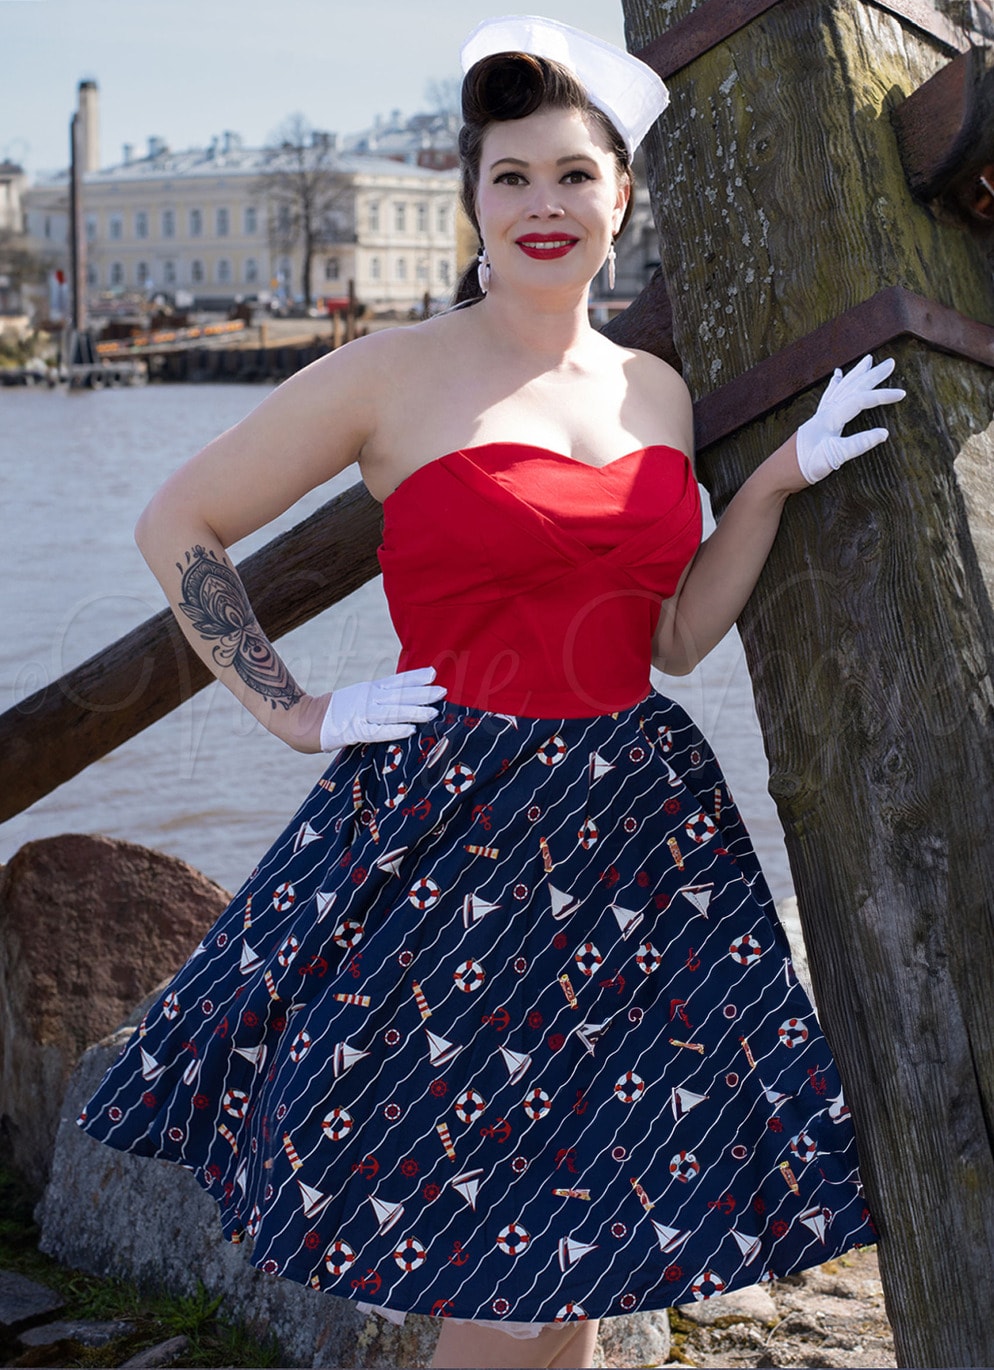 Dolly and Dotty 50's Retro Pin-Up Maritim Swing Kleid Melissa Nautical in Navy & Rot Petticoat Damenkleid Jive Lindy Hop Mottoparty Sommerkleid